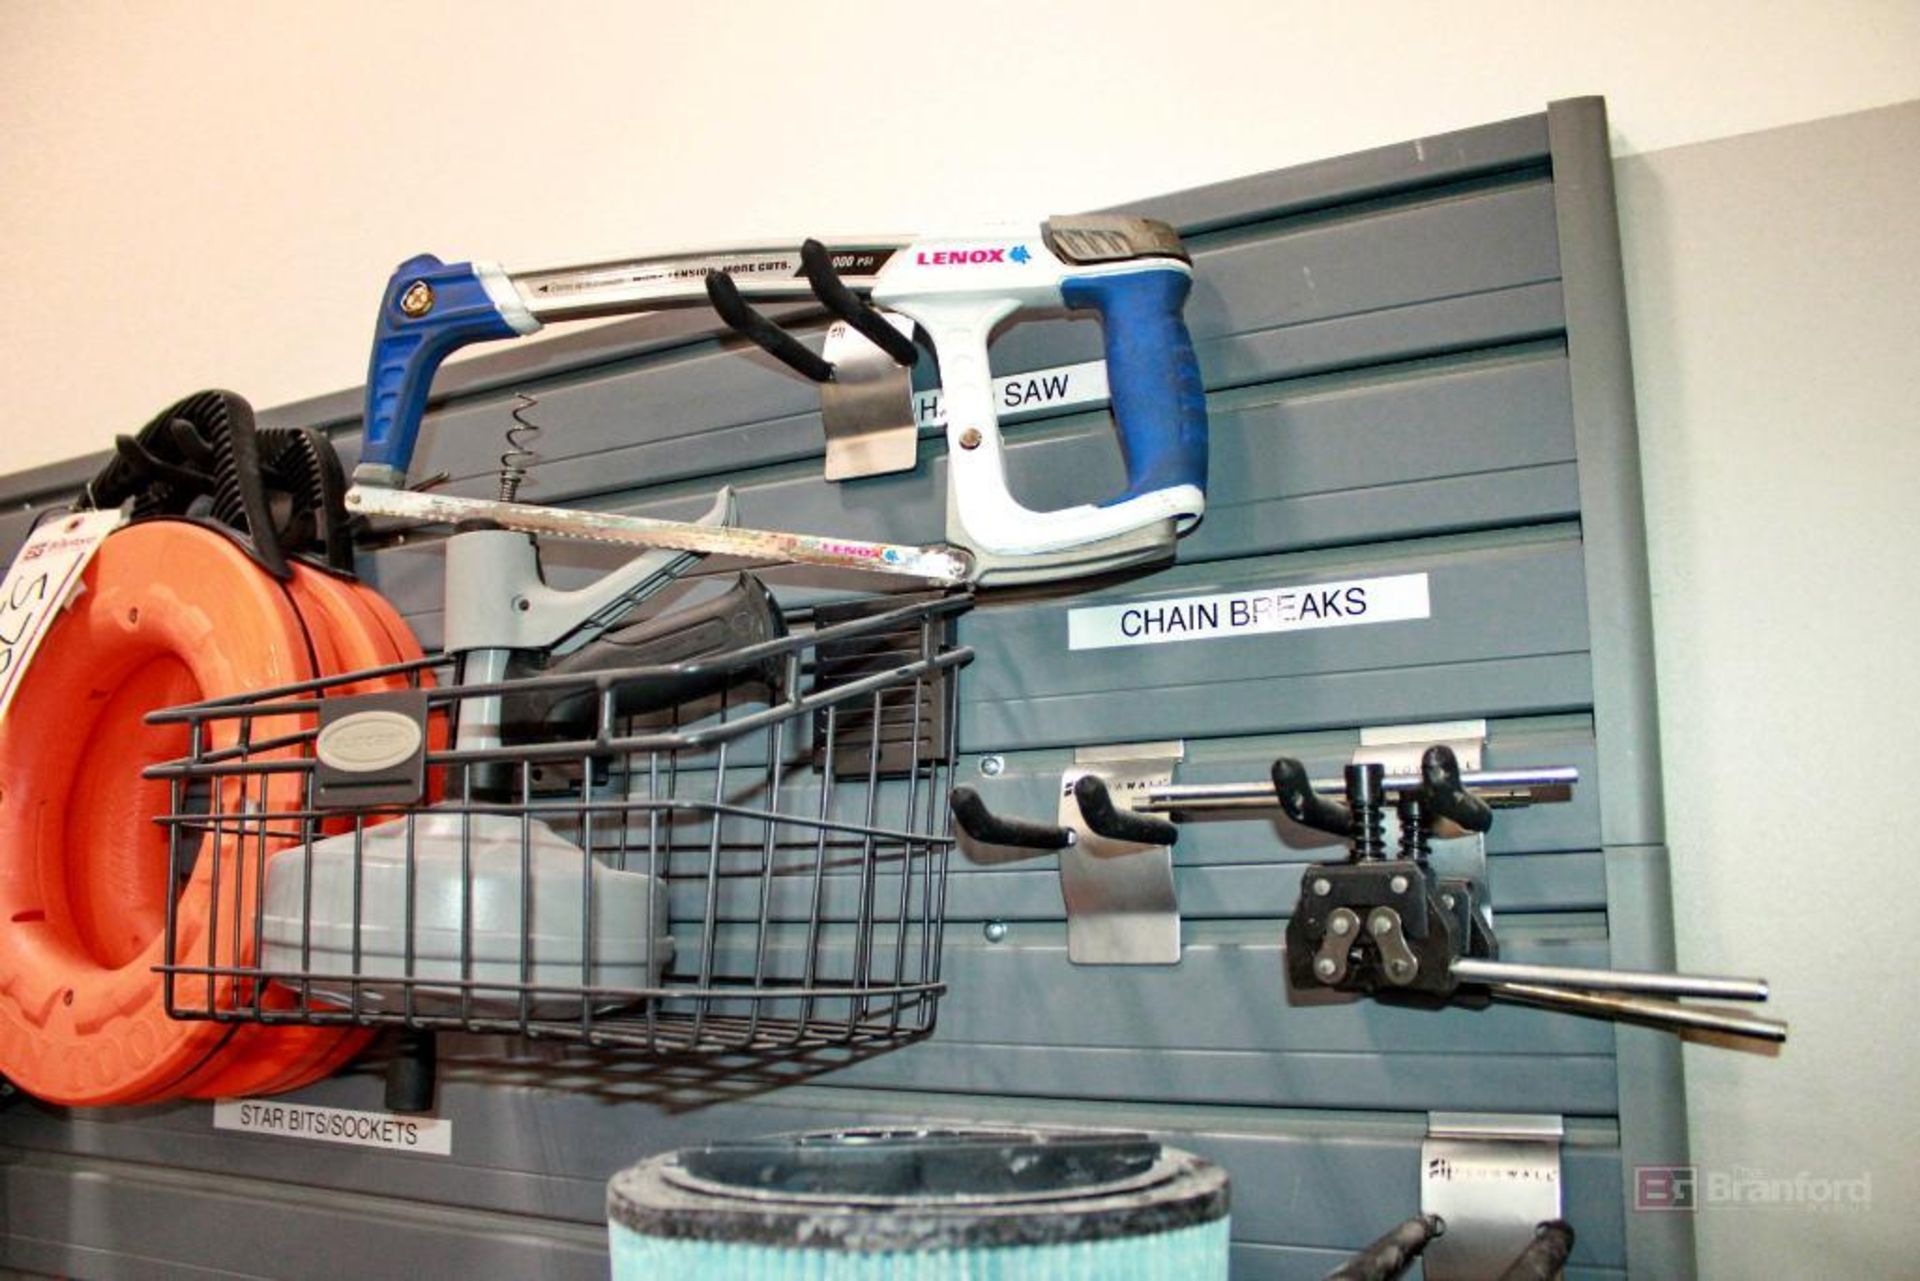 Contents of Tool Wall, with cart of tools - Image 8 of 11